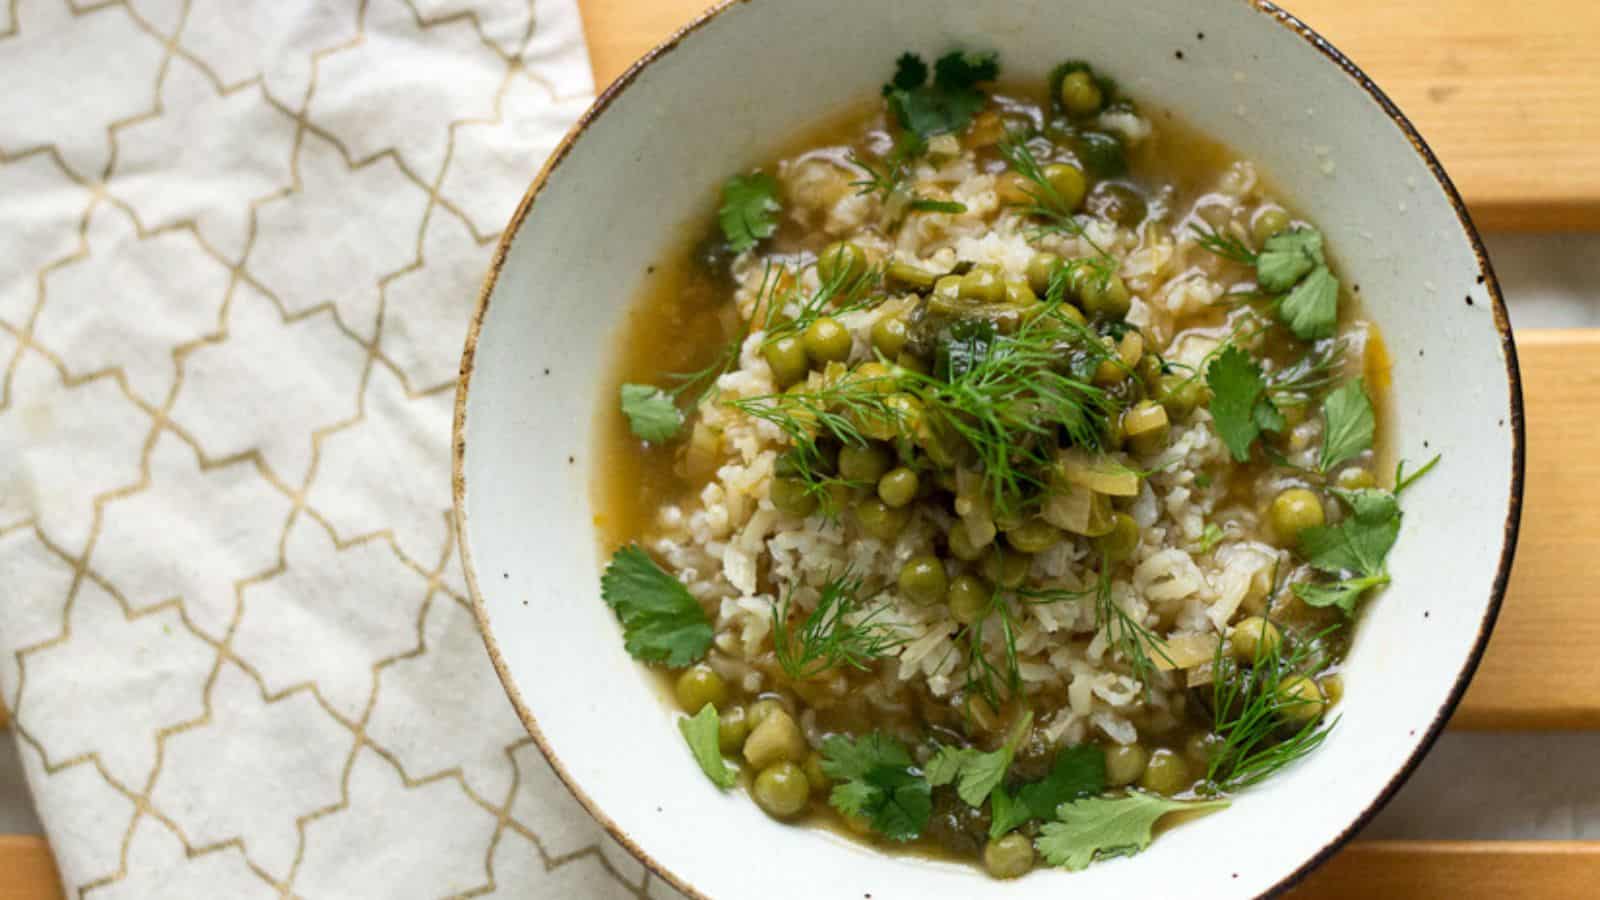 A bowl of rice and peas, a delectable veggie main, on a rustic wooden table.